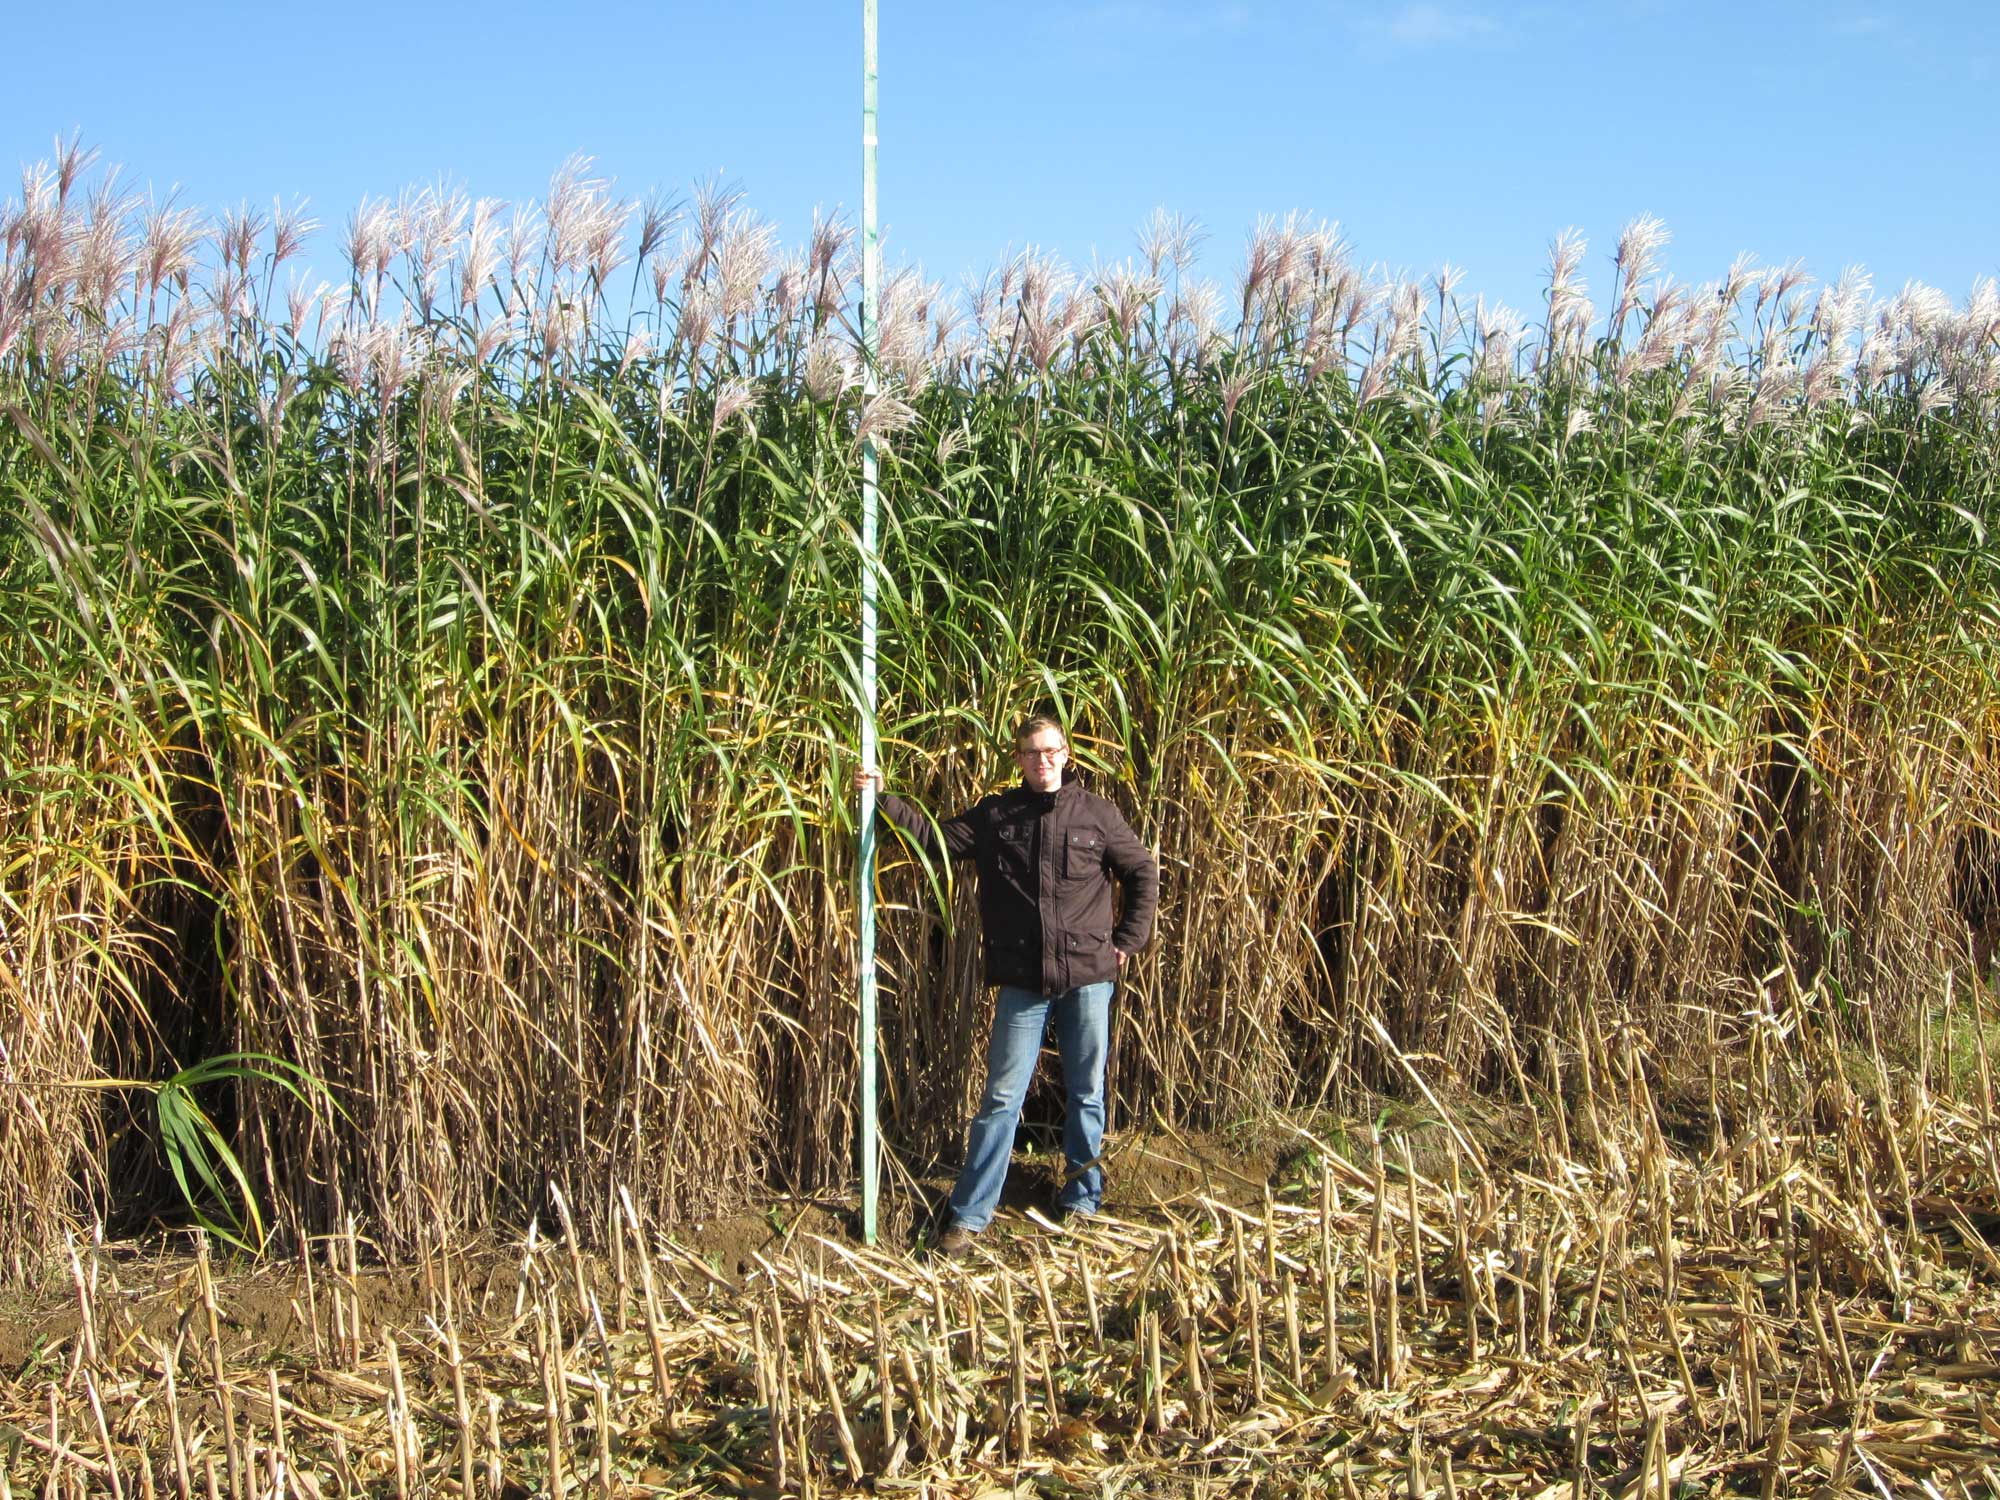 Photograph of a cultivated field of giant miscanthus. A man in a dark jacket and jeans stands in front of the giant miscanthus, holding what appears to be a measuring stick. The stems of the grasses are about twice as tall as the man. The grasses are brown and yellow at the base, green near the top, with leaves all the way up their stems. The inflorescences on top of the stems are silvery white and feathery.